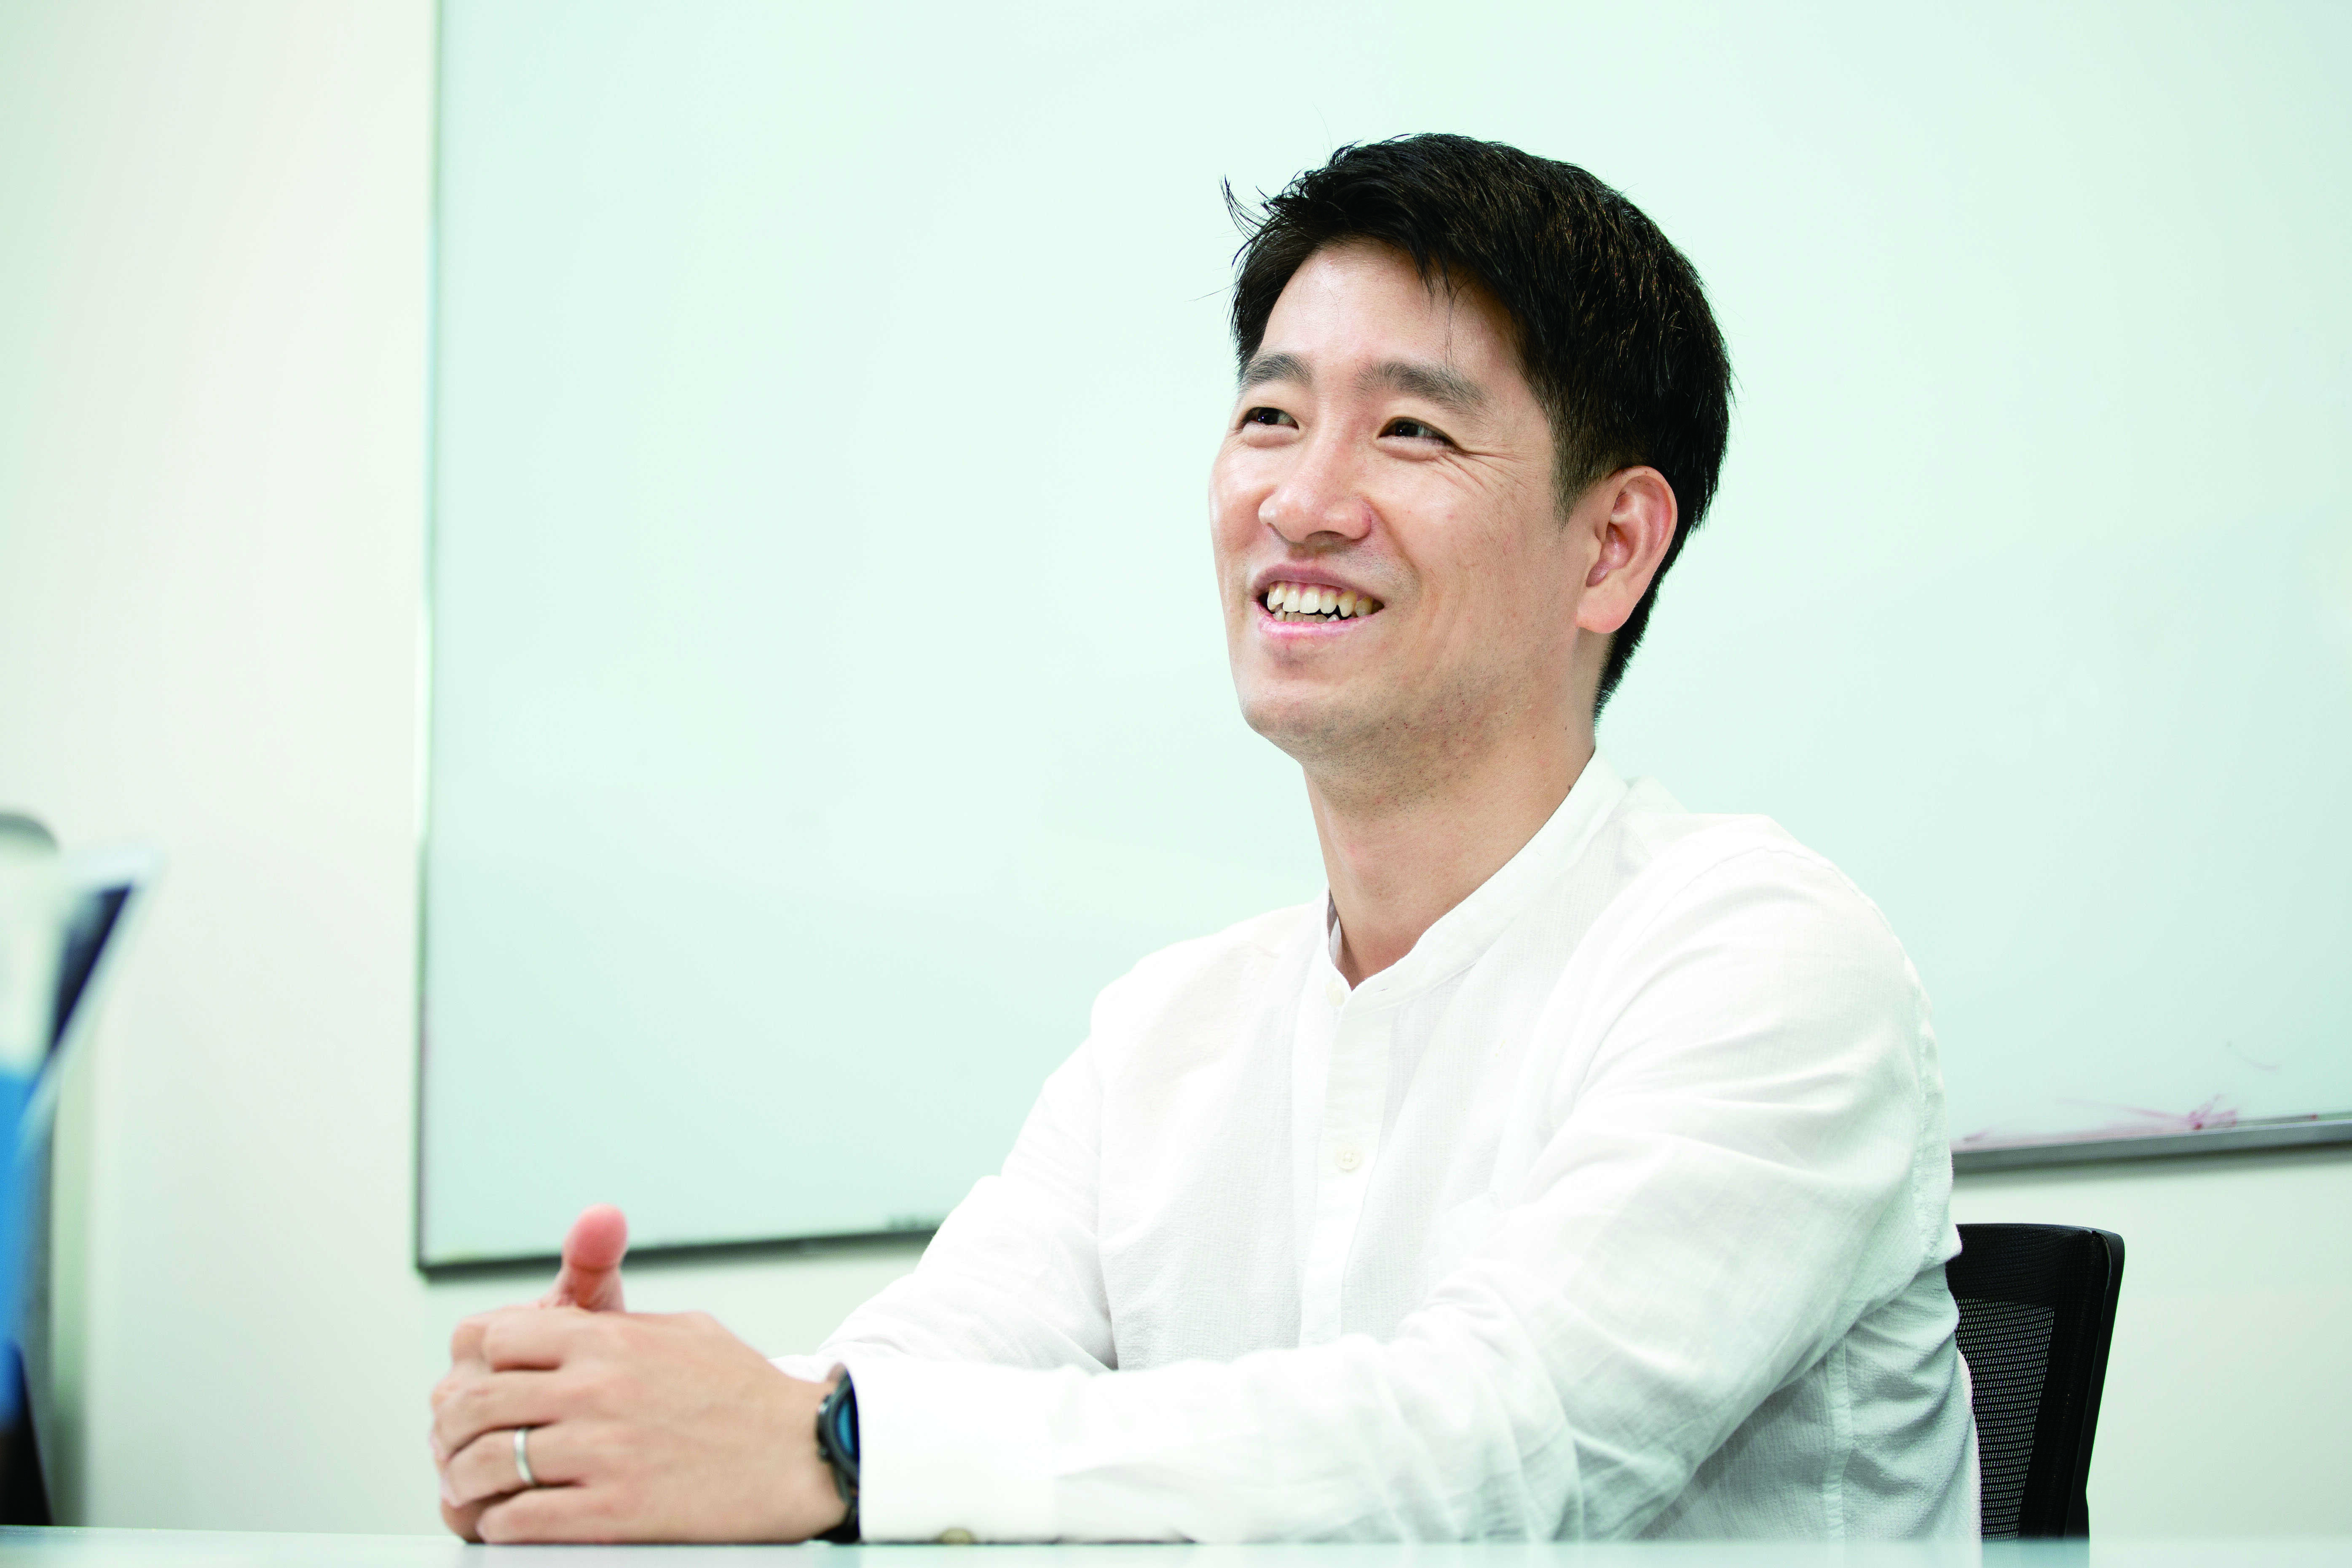 KIM Sung Shin
            Assistant Professor at Hanyang University Department of Psychology and Brain Science
            (Former Young Scientist Fellow (YSF) at IBS Center for Neuroscience Imaging Research)
            